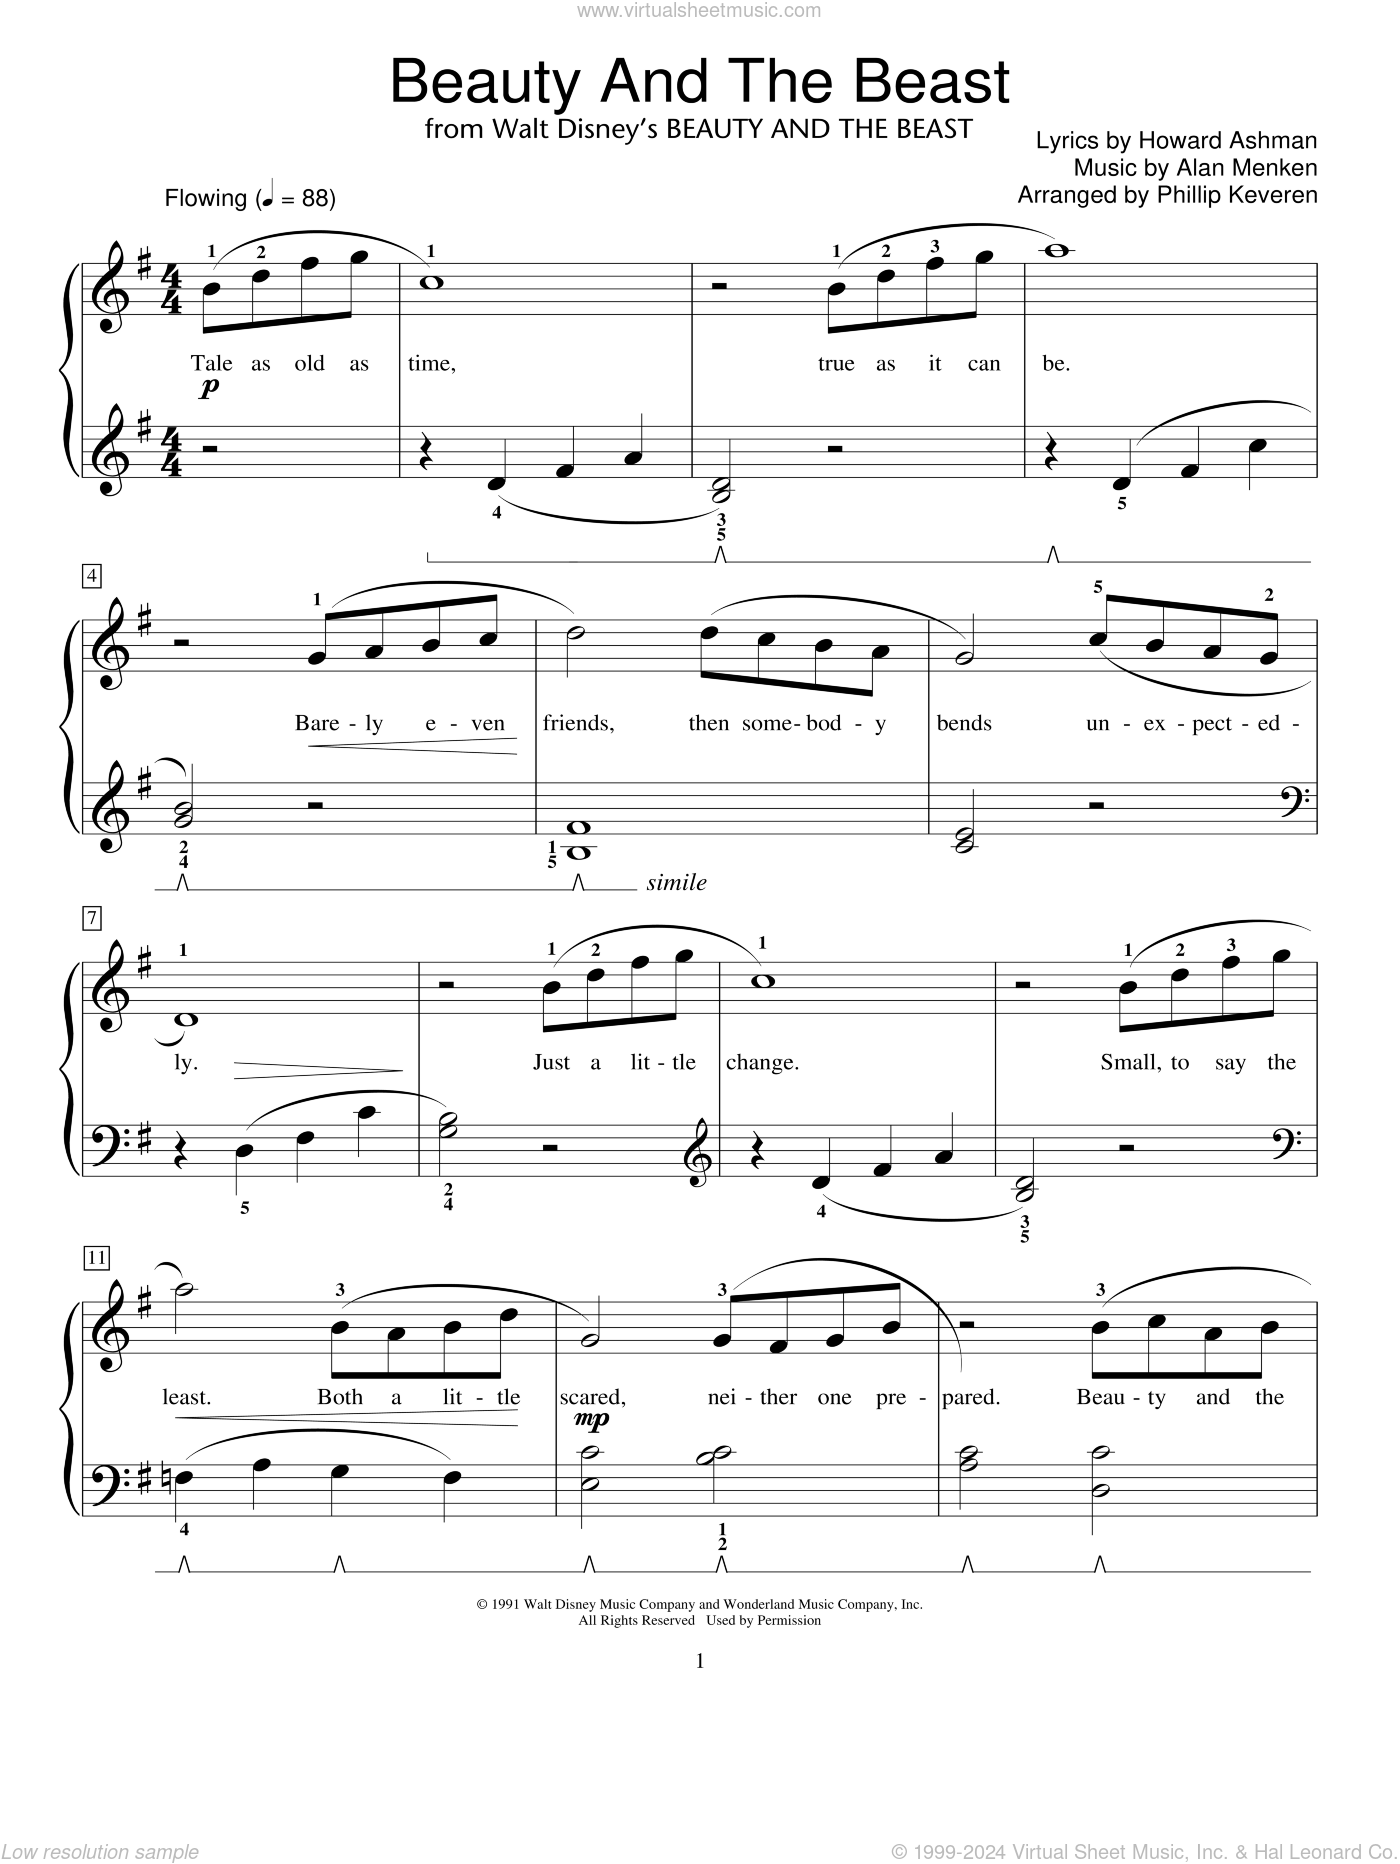 menken-beauty-and-the-beast-beginner-sheet-music-for-piano-solo